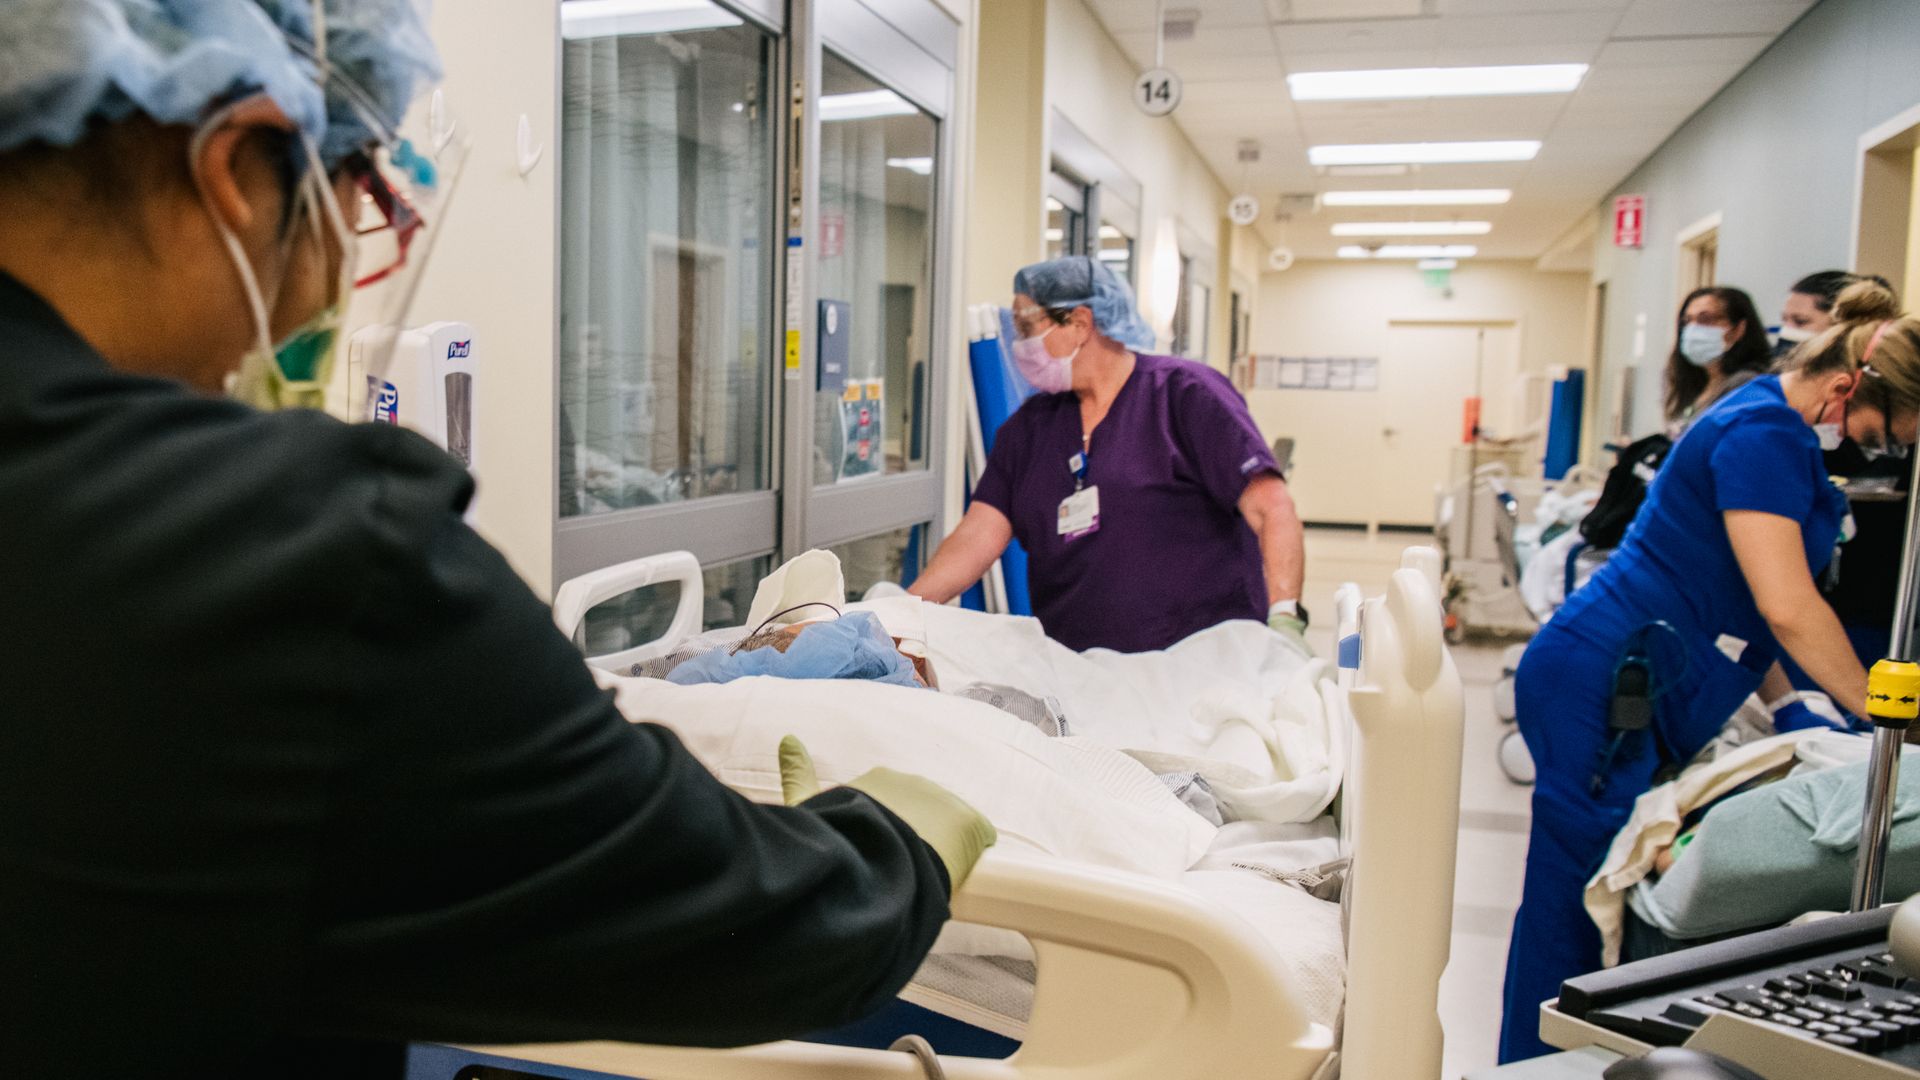 Emergency Room nurses tend to patients in a hallway at the Houston Methodist The Woodlands Hospital on August 18, 2021 in Houston, Texas.